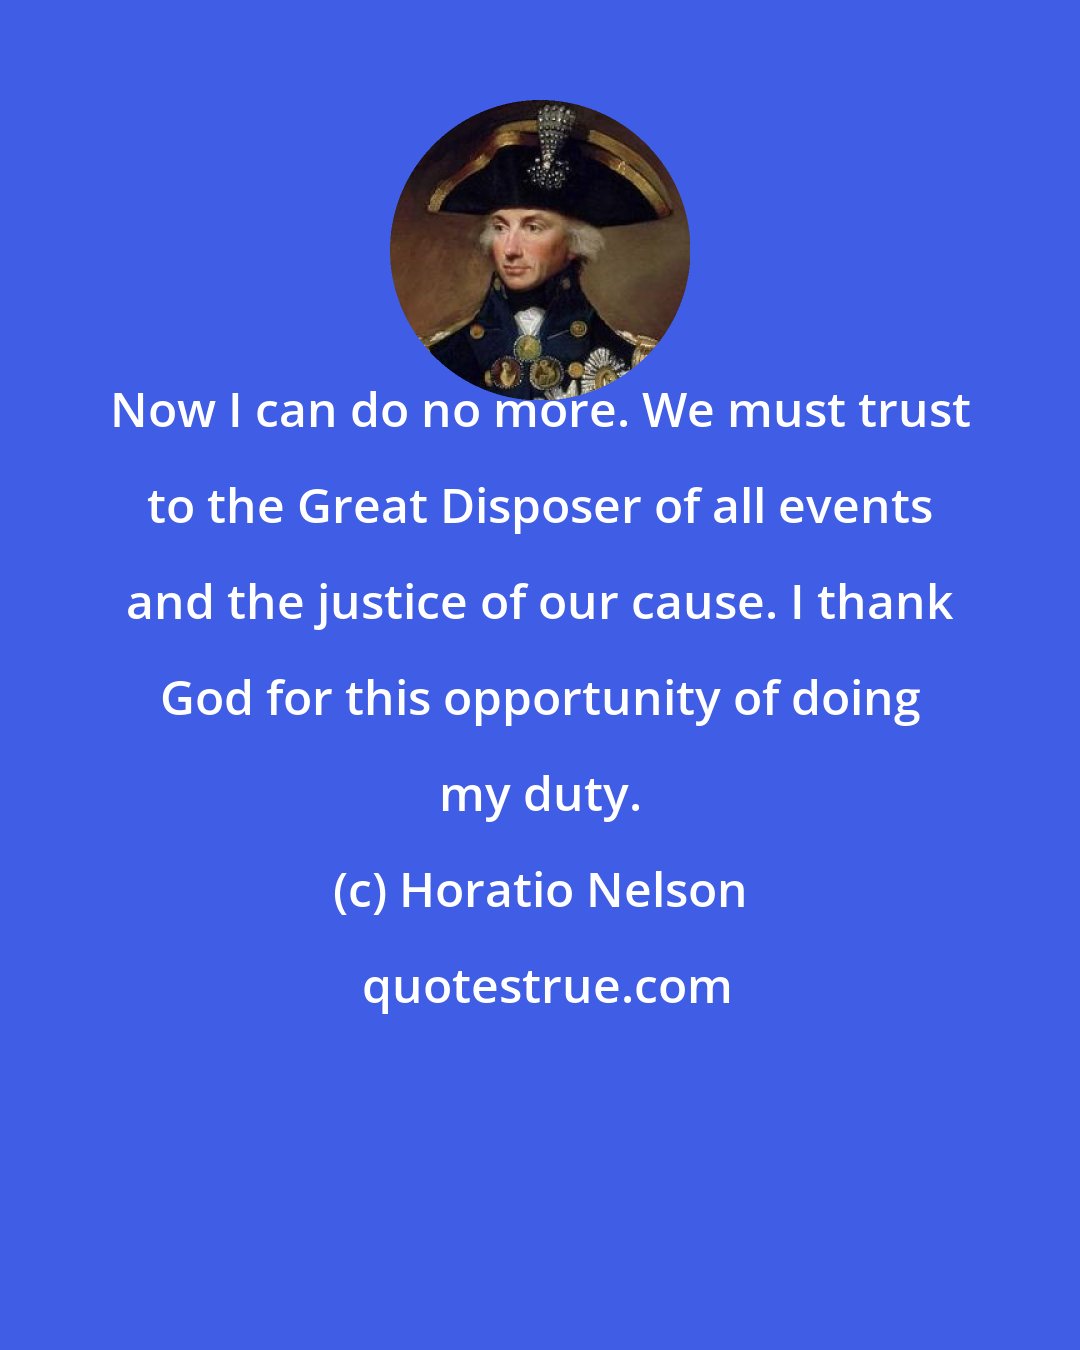 Horatio Nelson: Now I can do no more. We must trust to the Great Disposer of all events and the justice of our cause. I thank God for this opportunity of doing my duty.